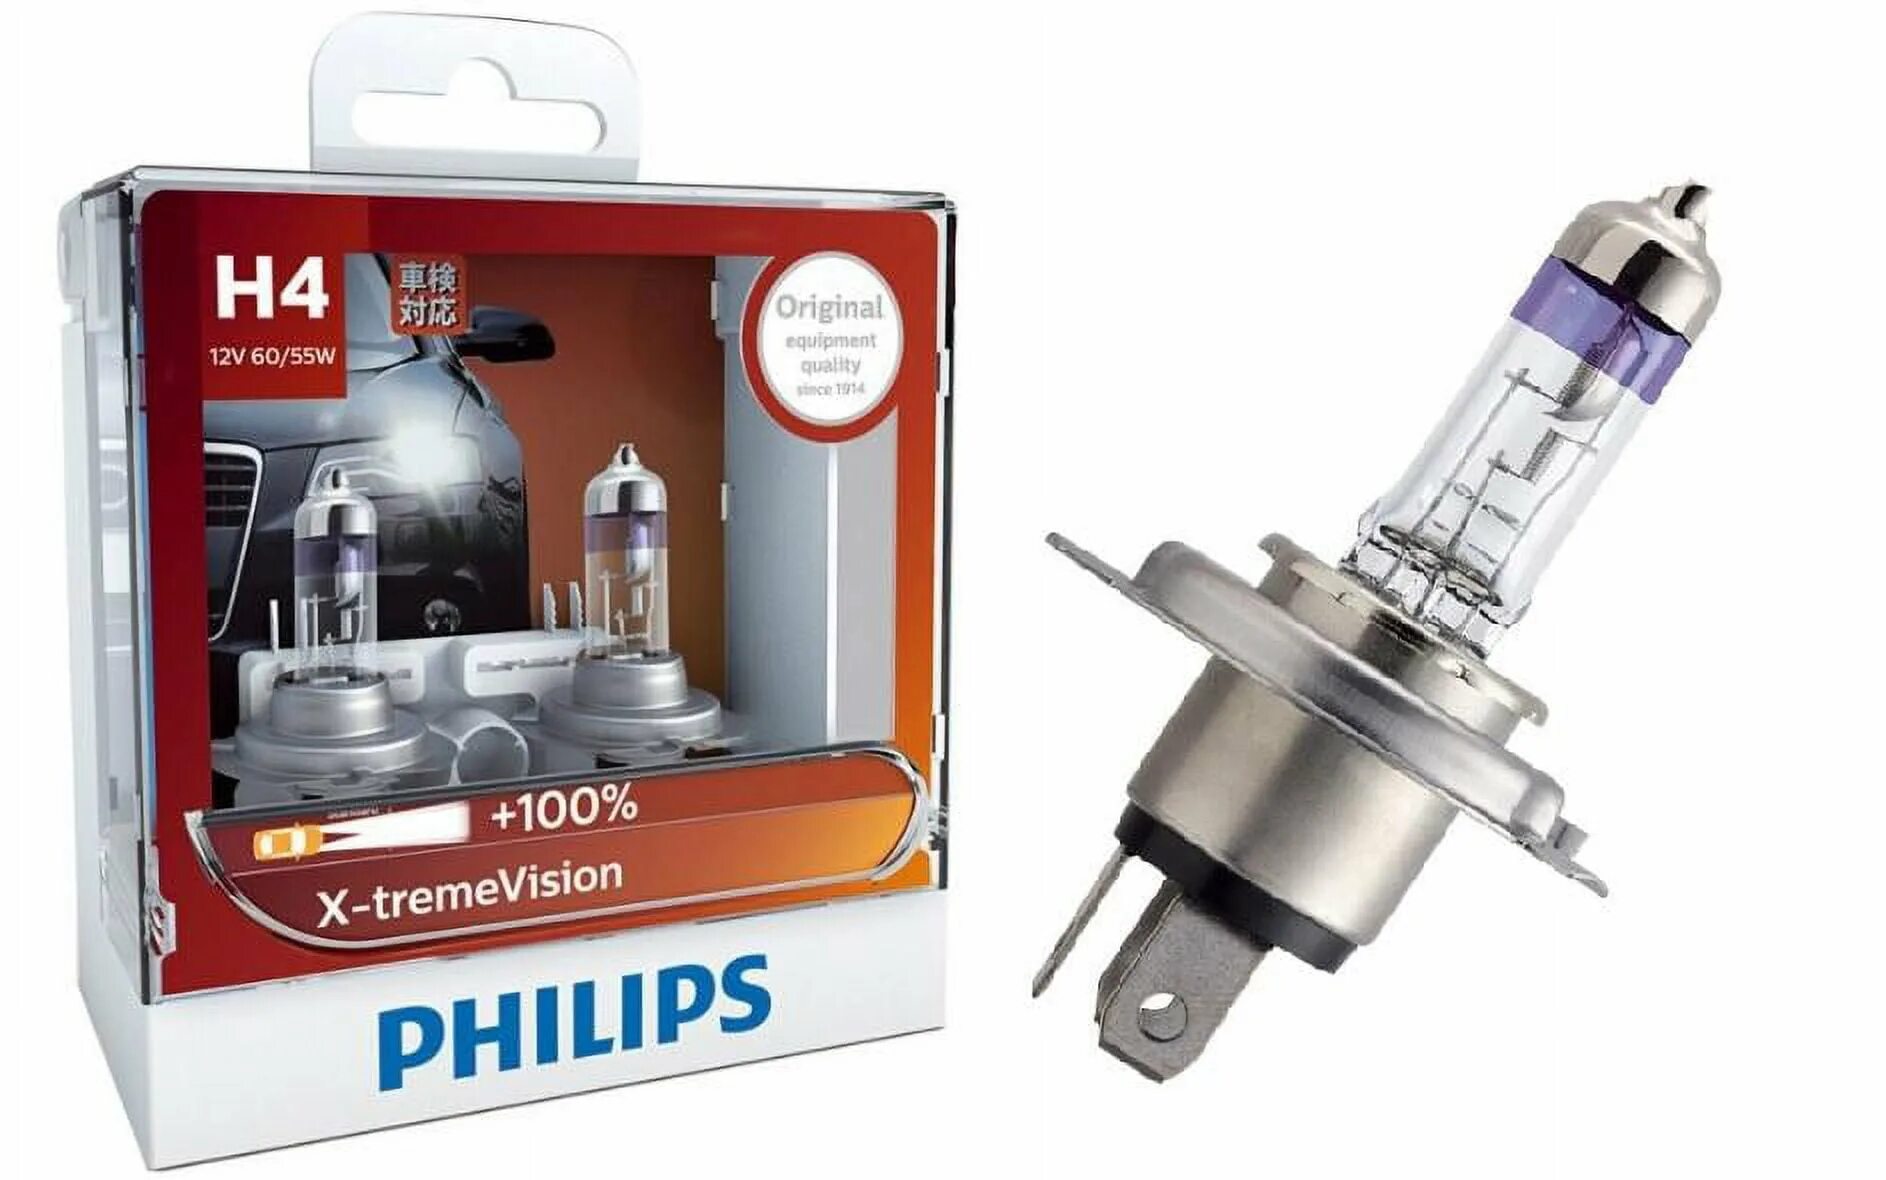 Philips h4 12v 60 55w. Philips h4 12342 12v 60/55w. Philips h-4 12v 60/55w Standard 12342 prс1. Филипс 12342 h4. Лампа Philips h4 12v60/55w p43t +200% Racing Vision gt200.